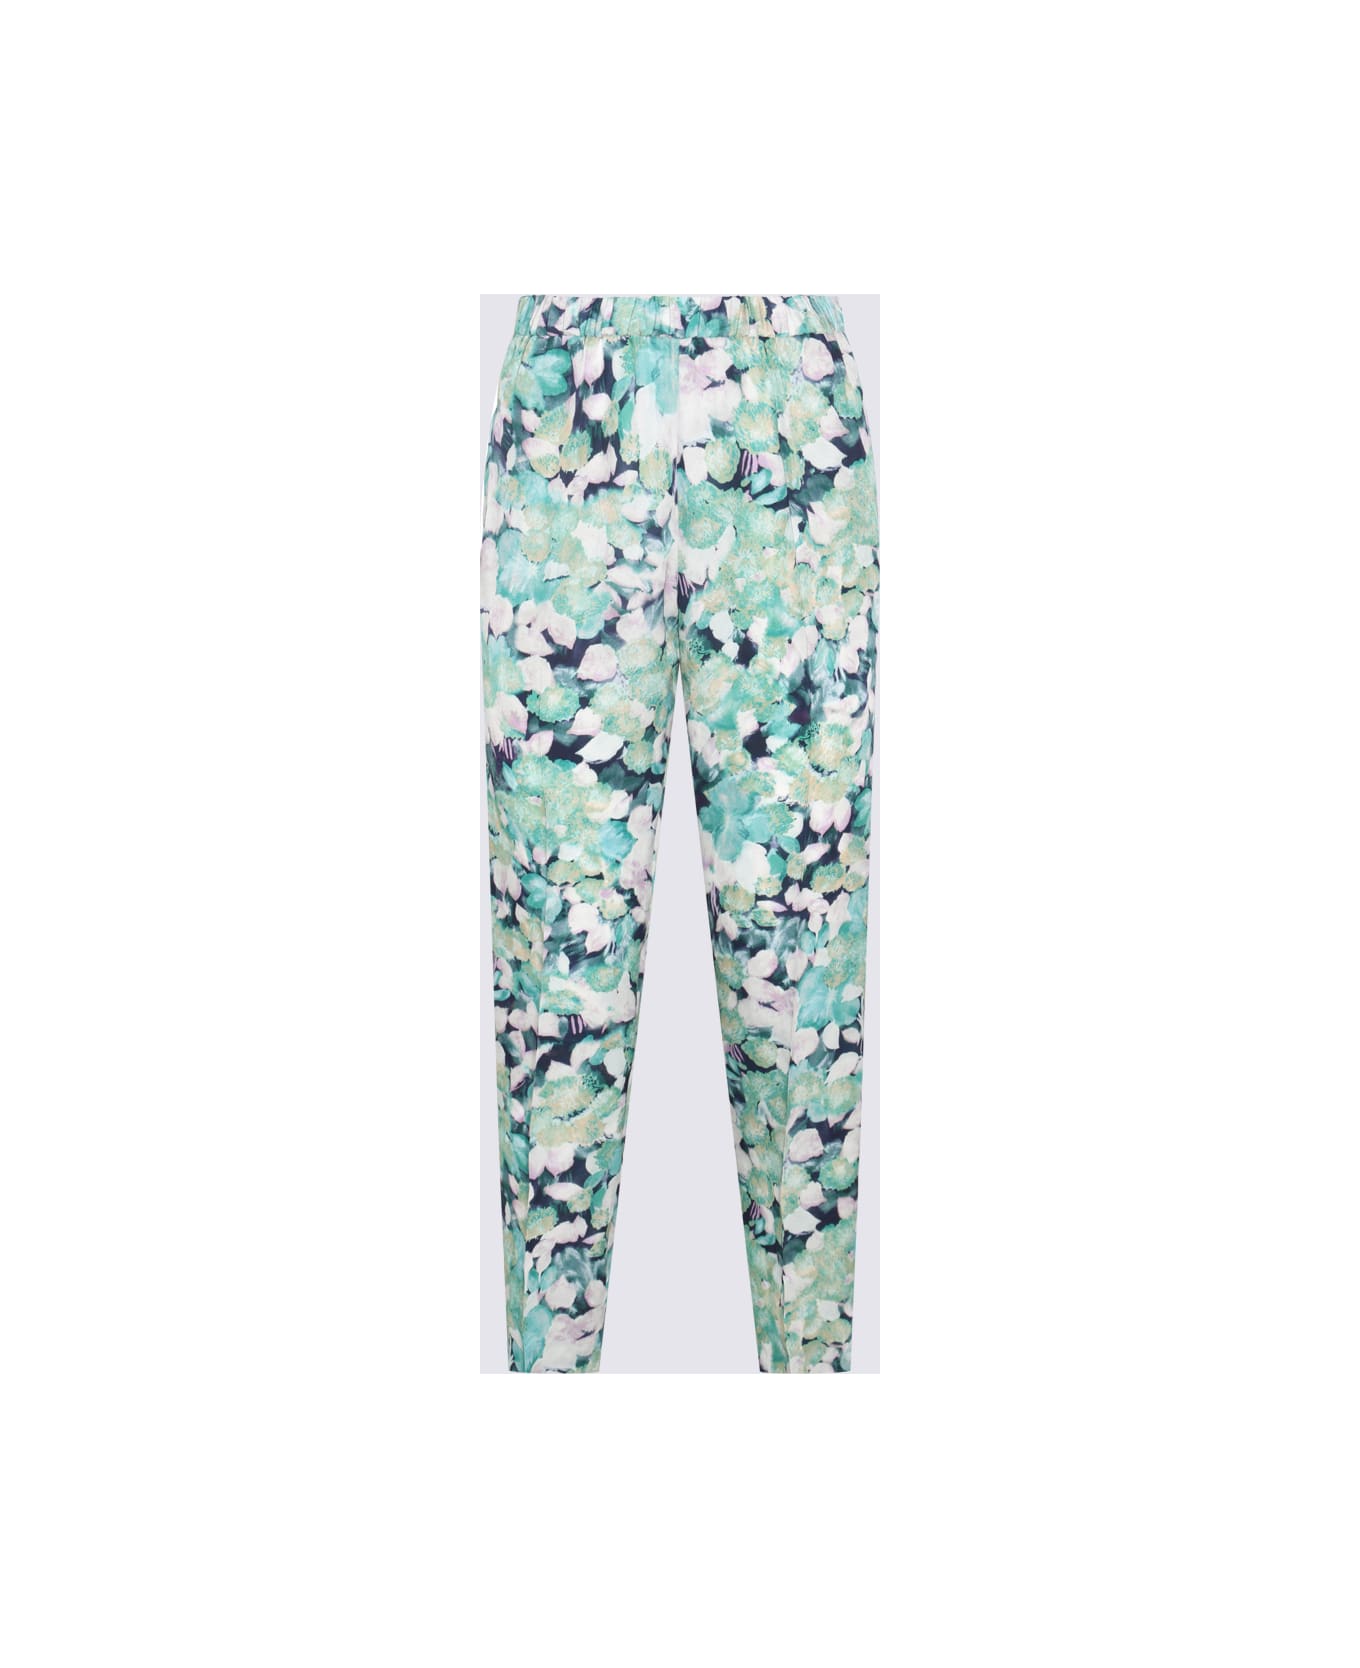 Dries Van Noten Turquoise And Blue Floreal Pants - TURQUOISE